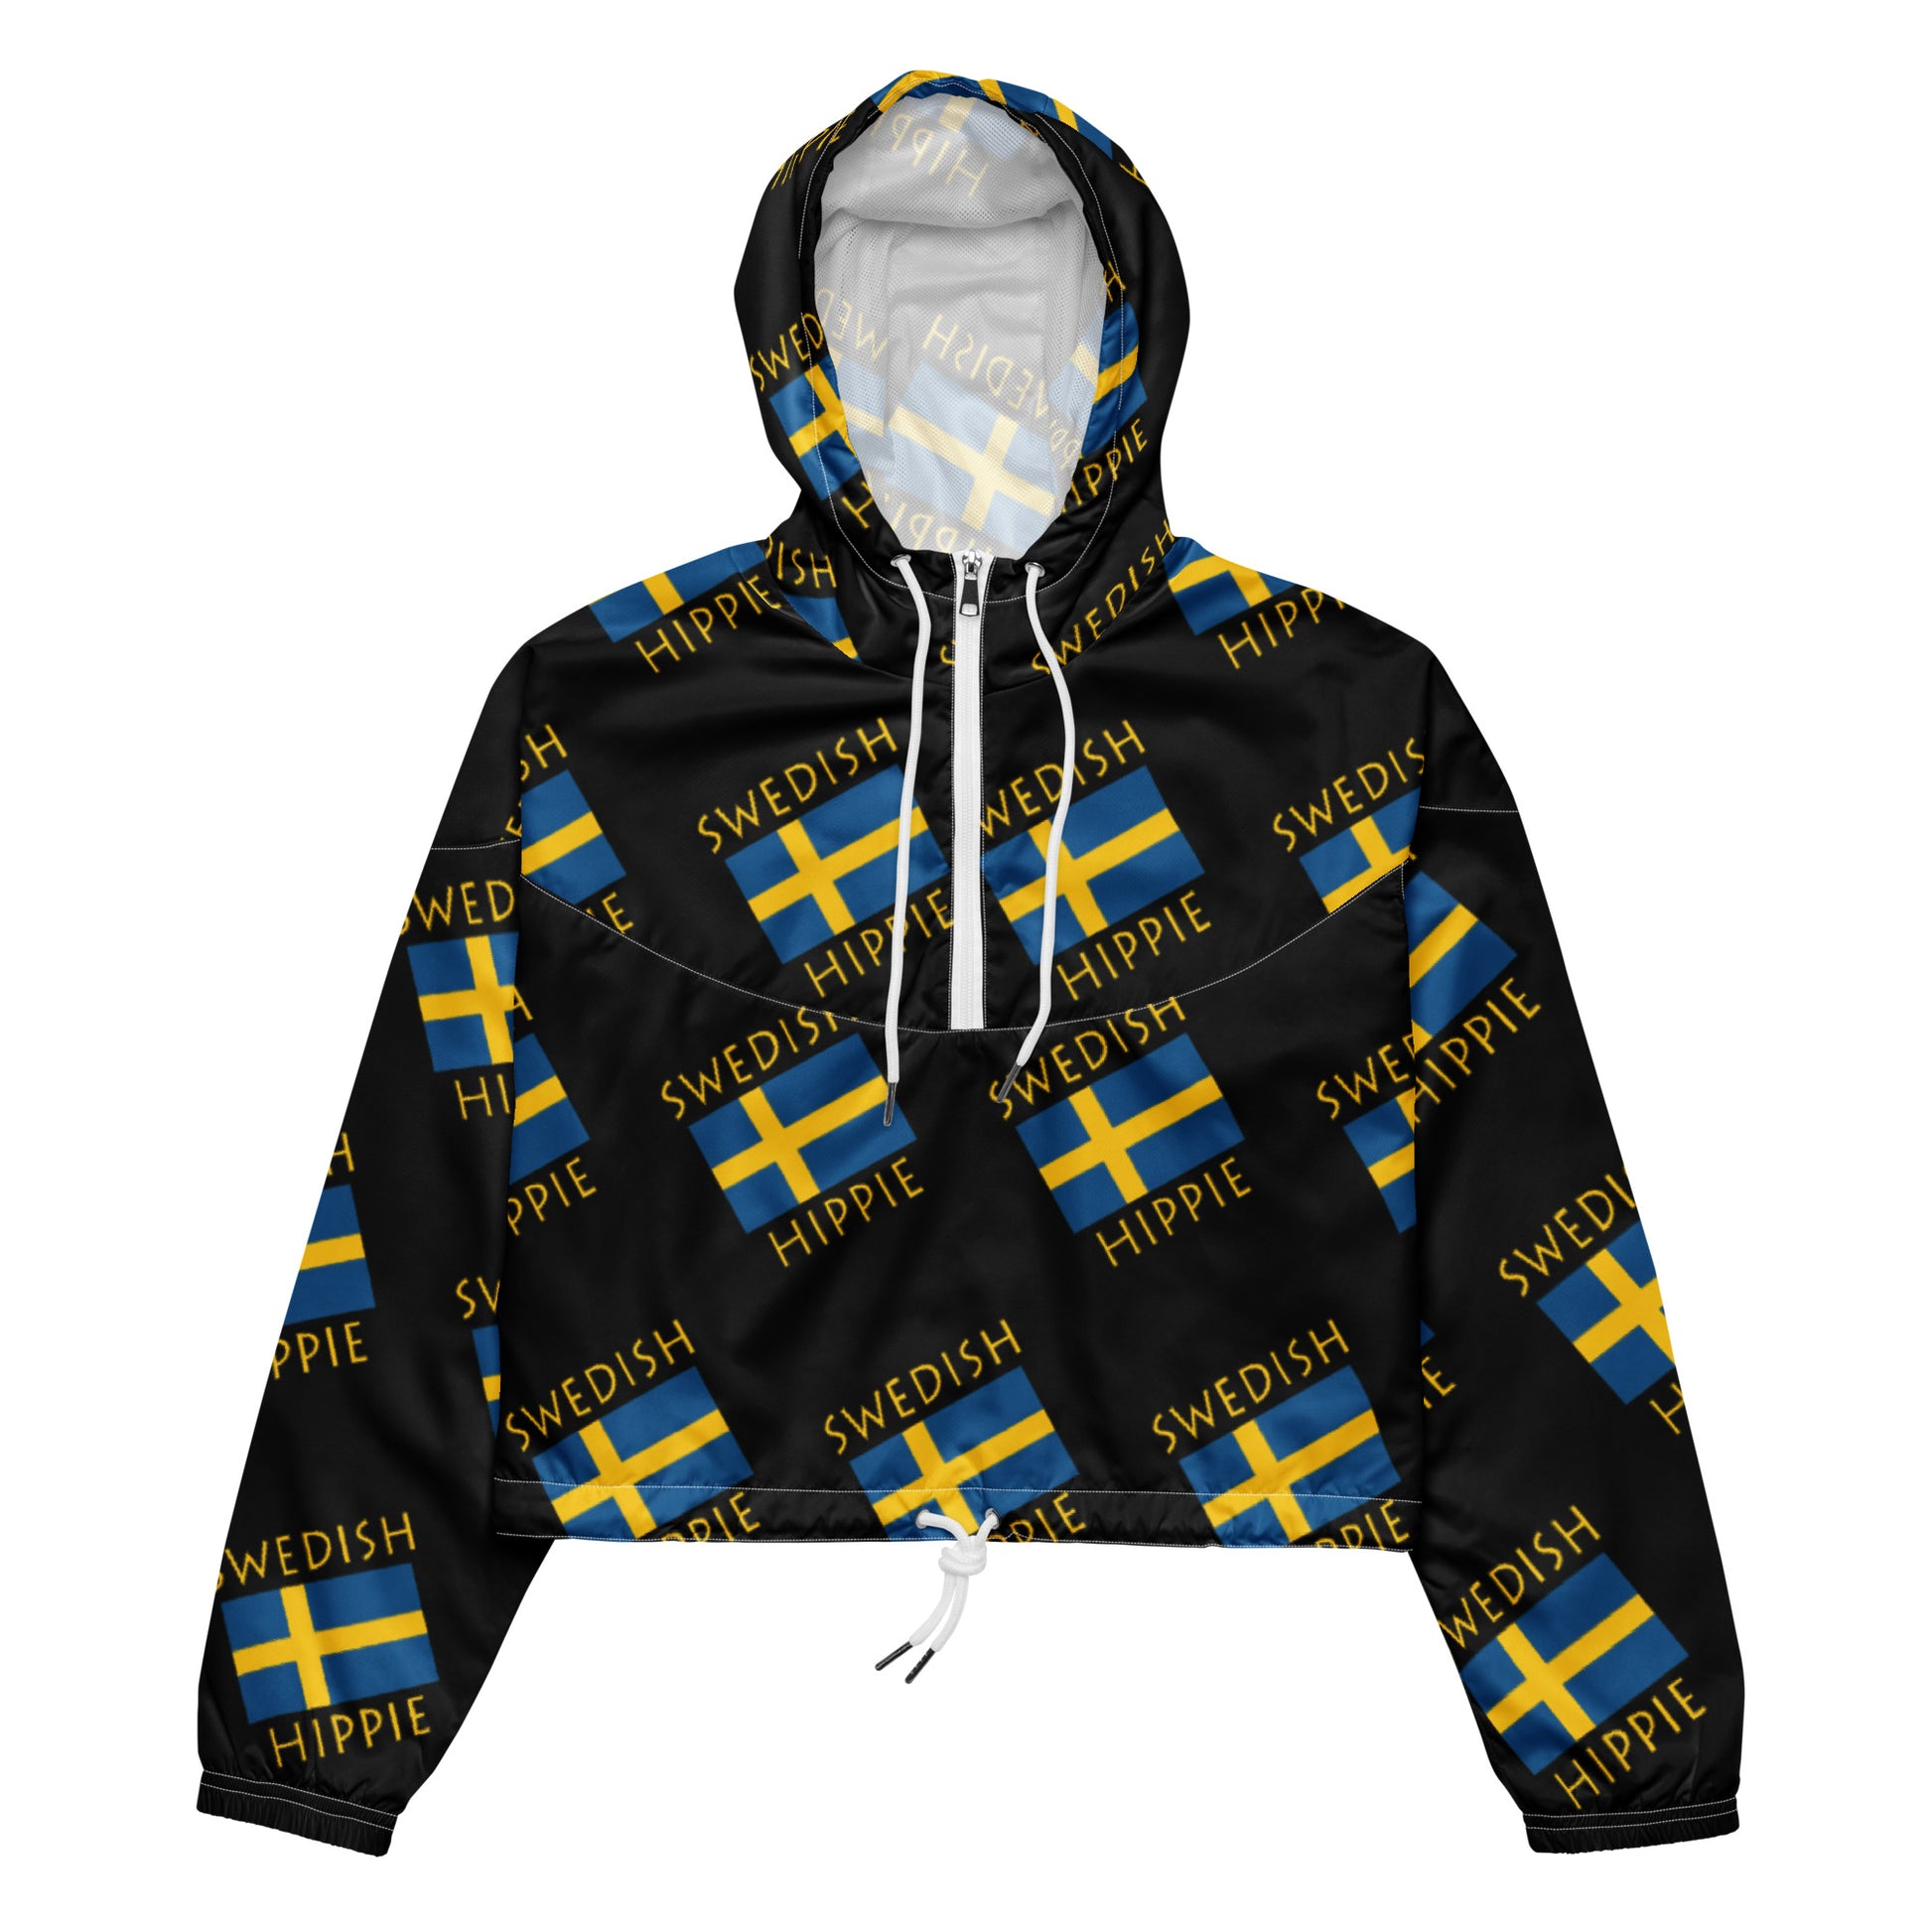 This Swedish Flag Hippie™ stylish cropped half-zip windbreaker is a fashion statement! The repeating Swedish Flag Hippie design is the coolest, hippest, trendiest piece in your wardrobe! Hike in style without the rain getting in the way...this cropped windbreaker is lightweight, waterproof, and suitable for every kind of adventure. Features include side-slit pockets, breathable mesh lining, and adjustable drawstring on the hood and waist to support all your stylish outdoor looks.